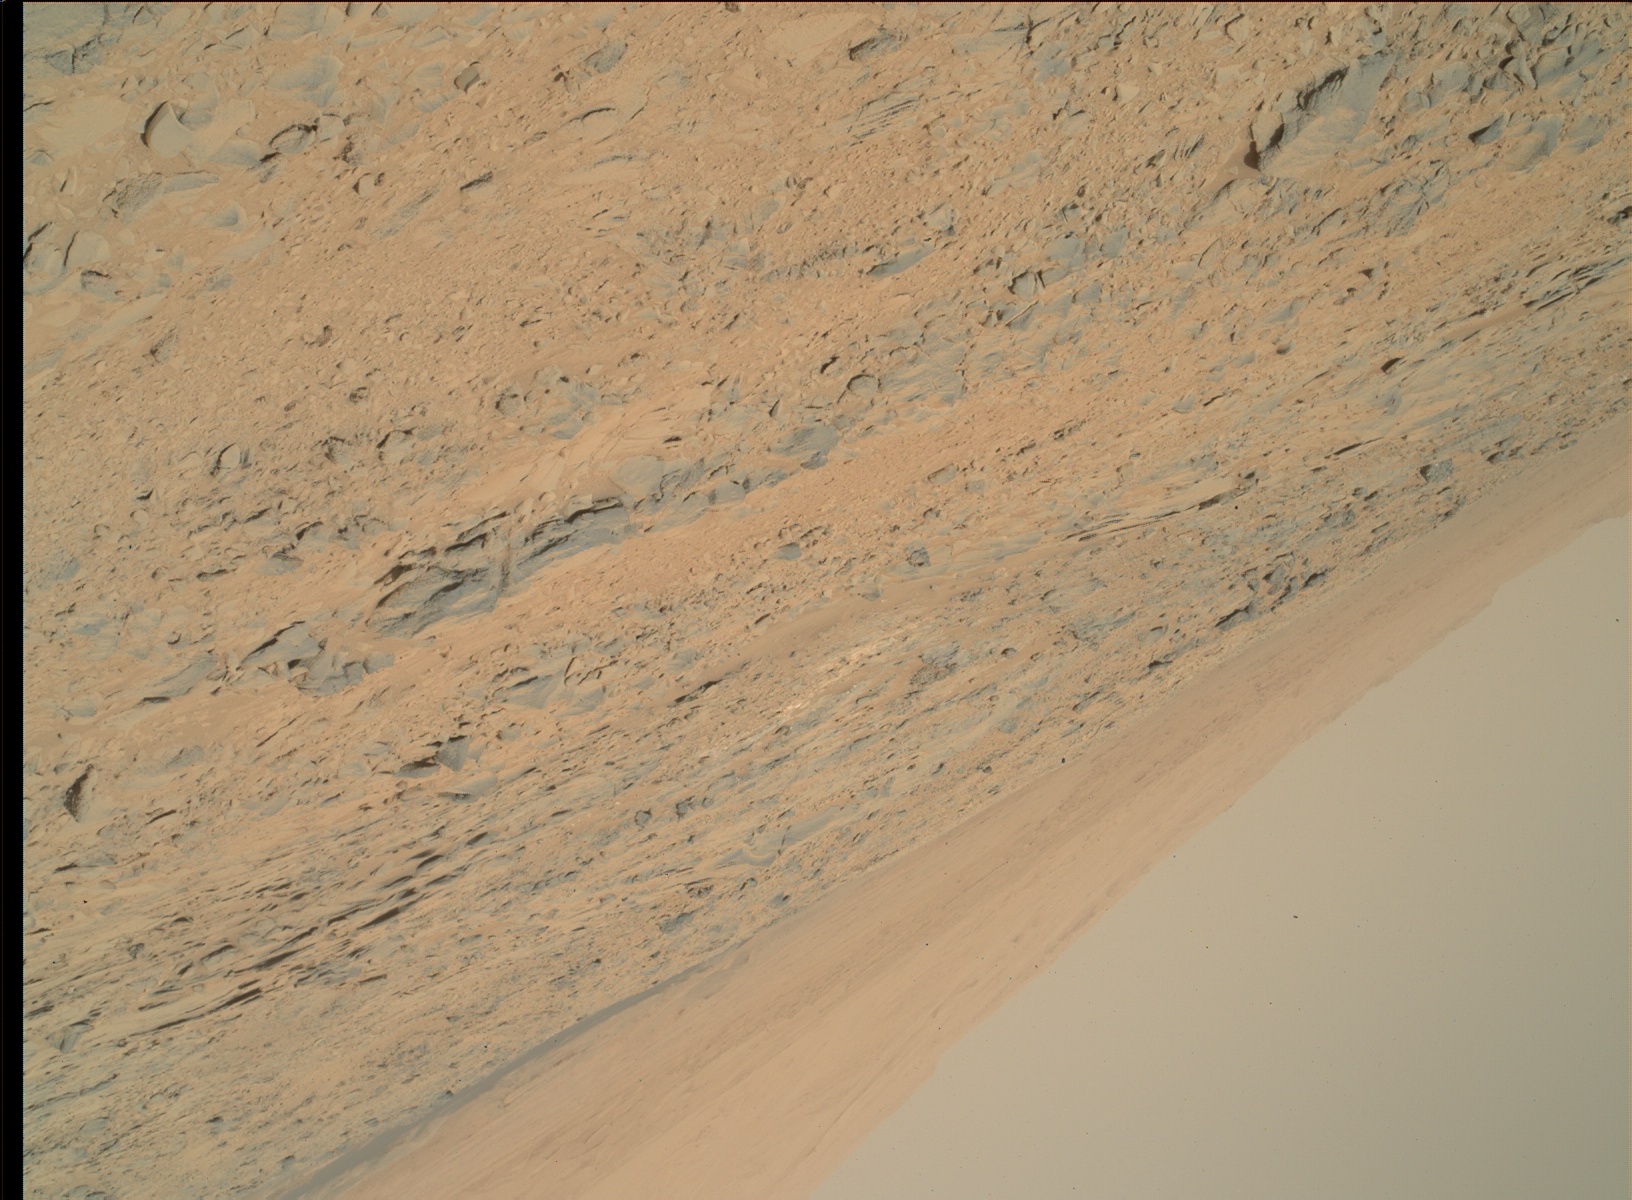 Nasa's Mars rover Curiosity acquired this image using its Mars Hand Lens Imager (MAHLI) on Sol 438